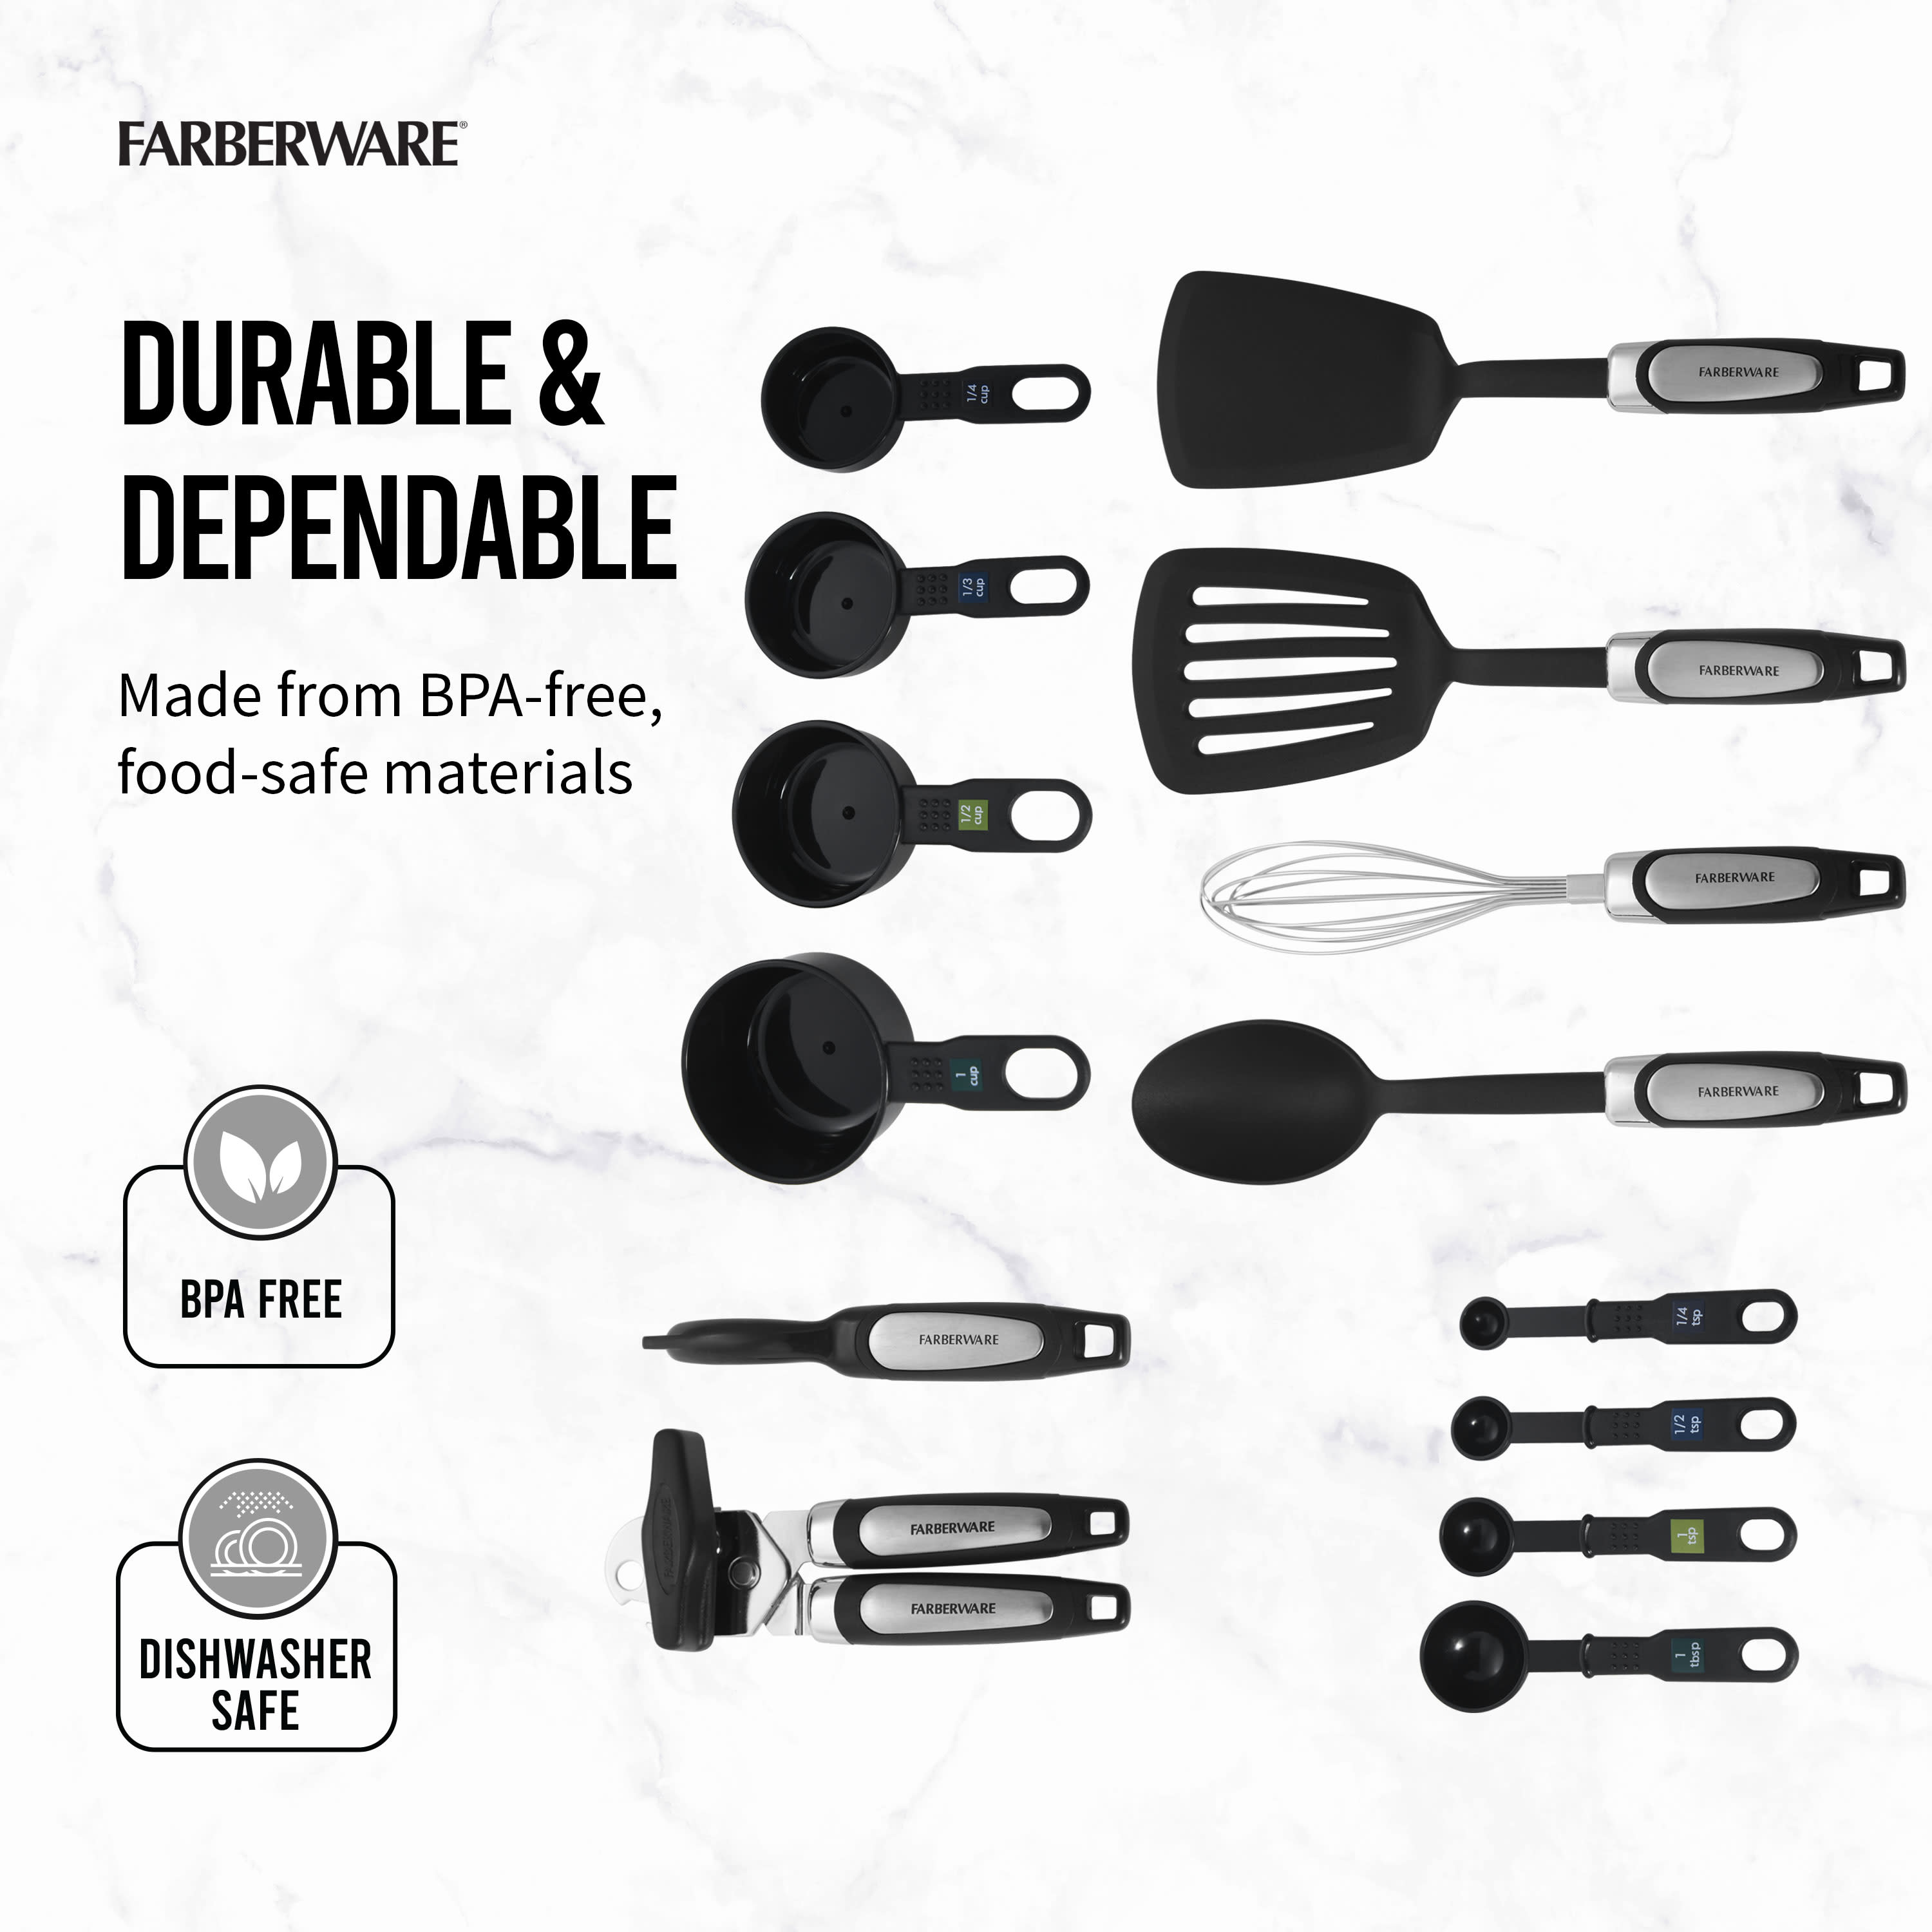 Farberware Professional 14-piece Kitchen Tool and Gadget Set in Black - image 4 of 19